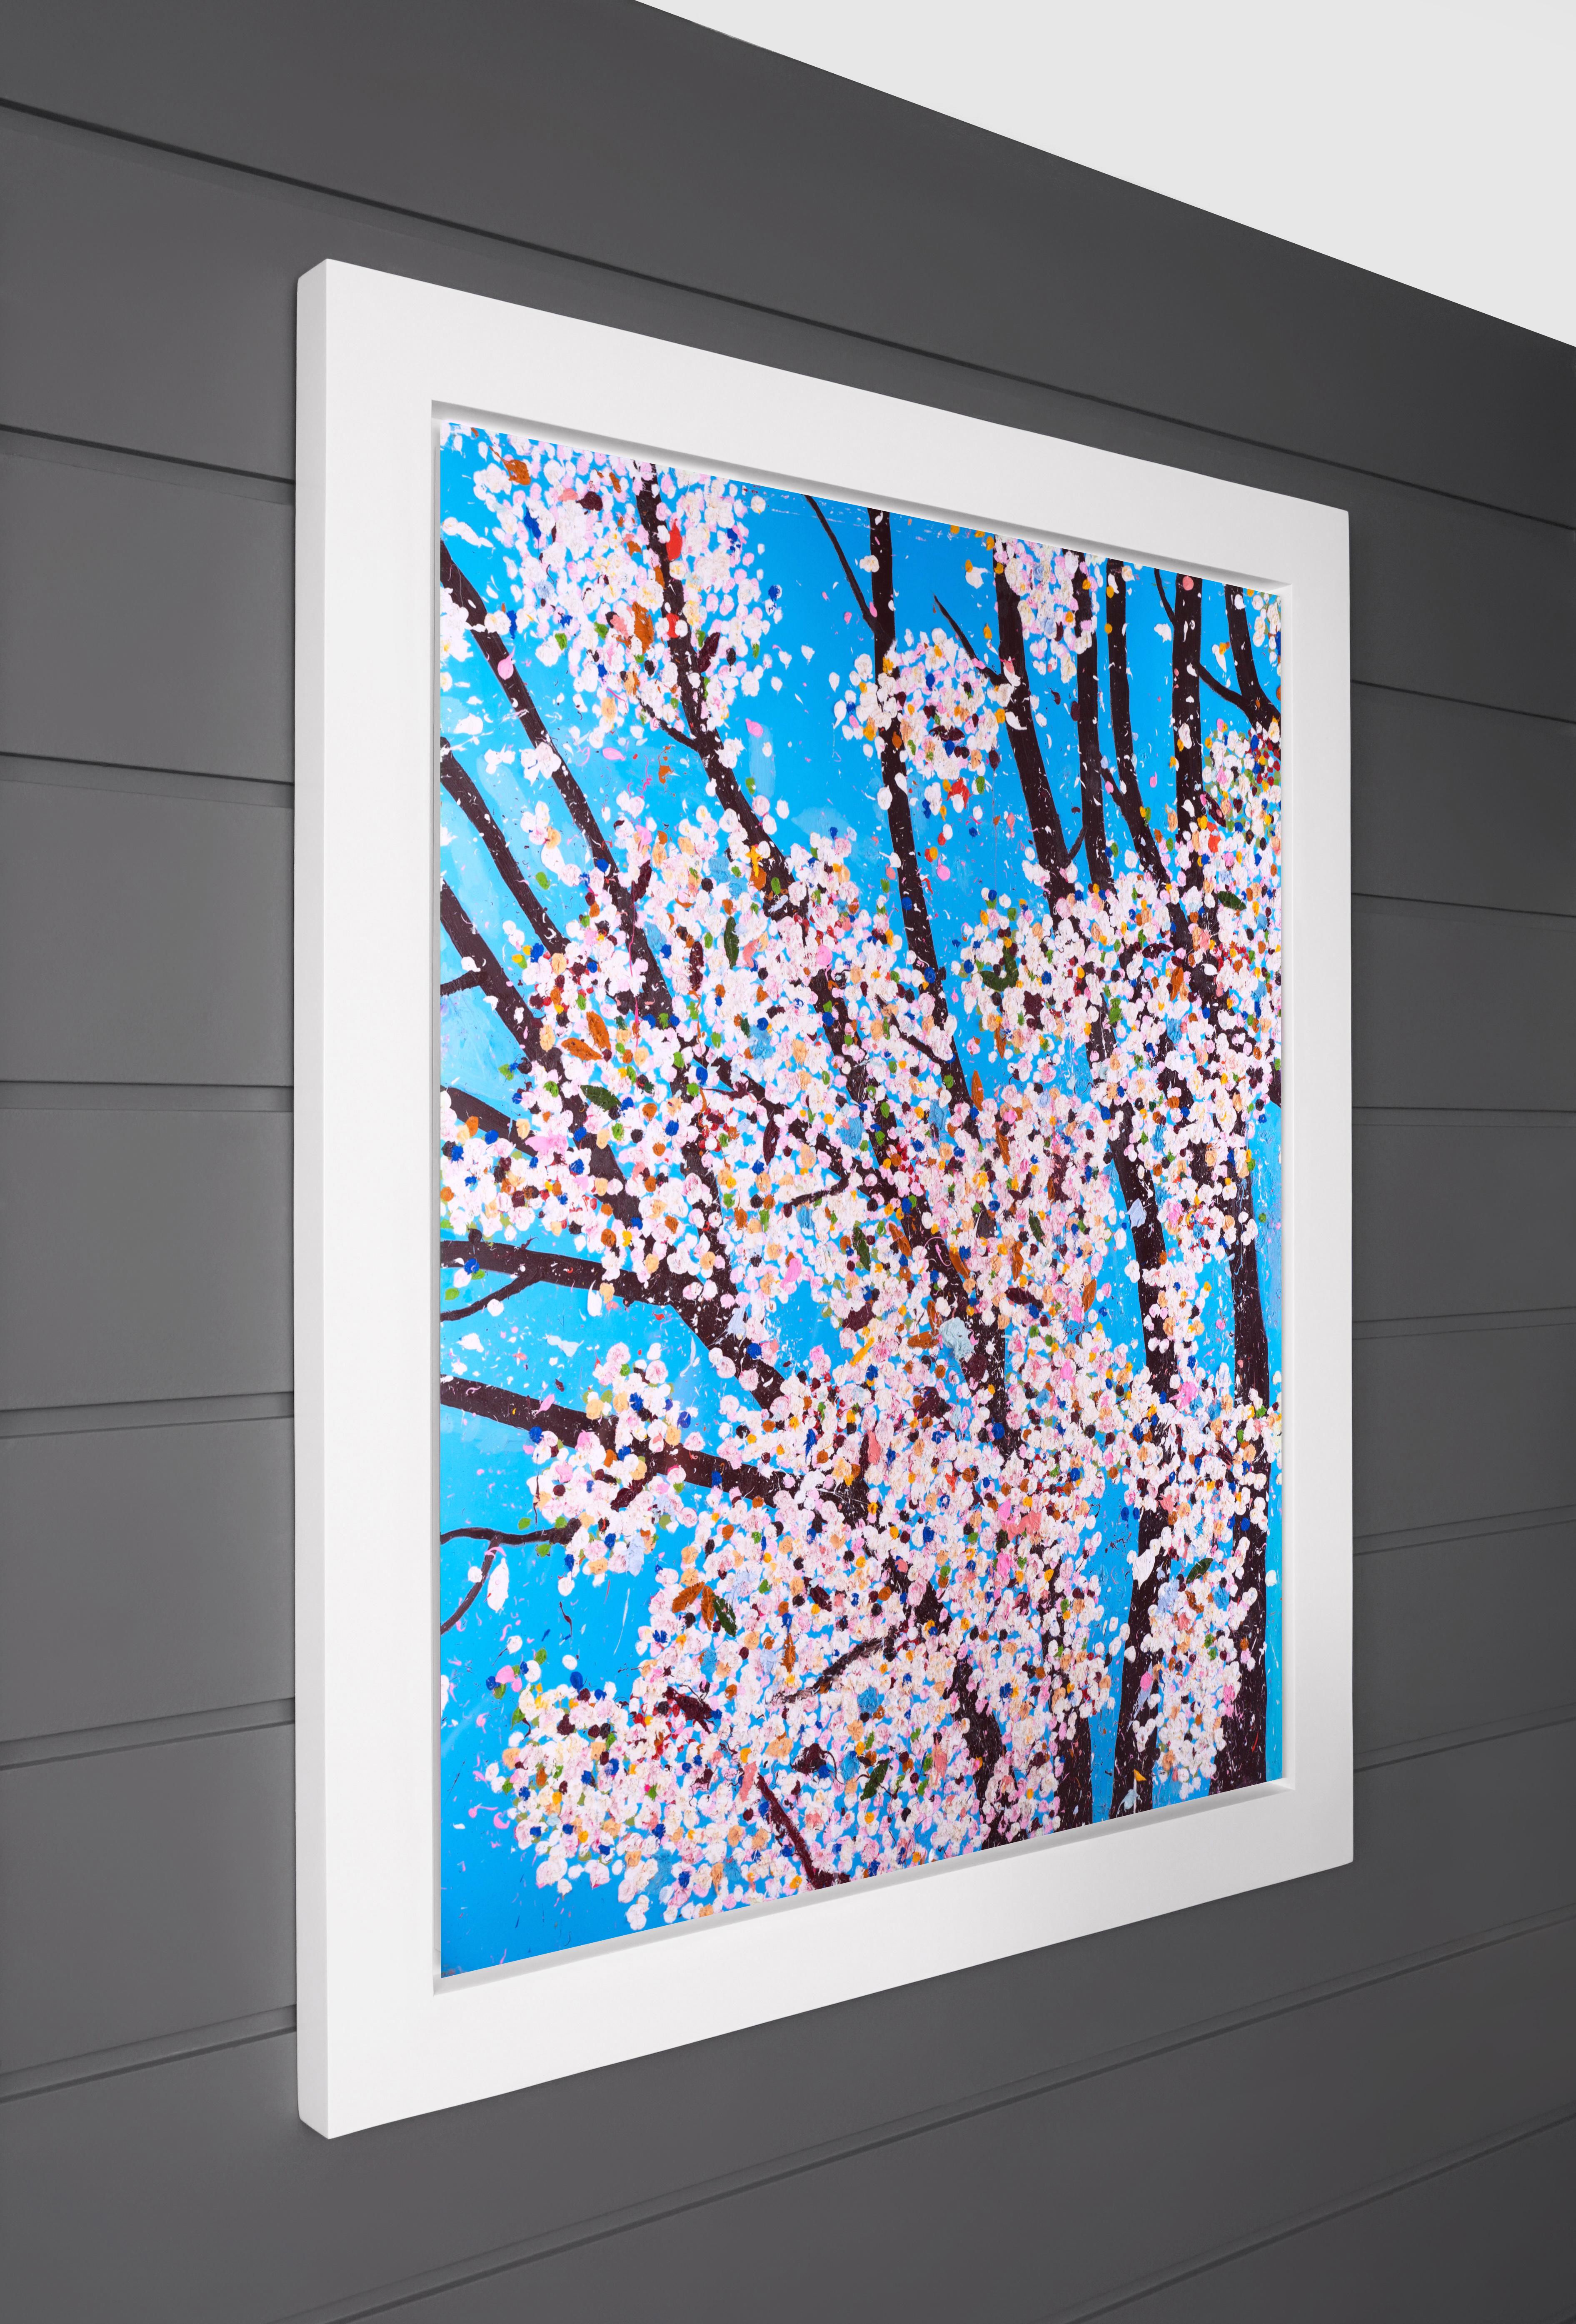 The contemporary pop art cherry blossom ‘Justice' is one of the eight from the iconic ‘Virtues’ series by Damien Hirst, the laminated giclée print on aluminum panel was created in 2021 as a reflection of his latest exploration as a master